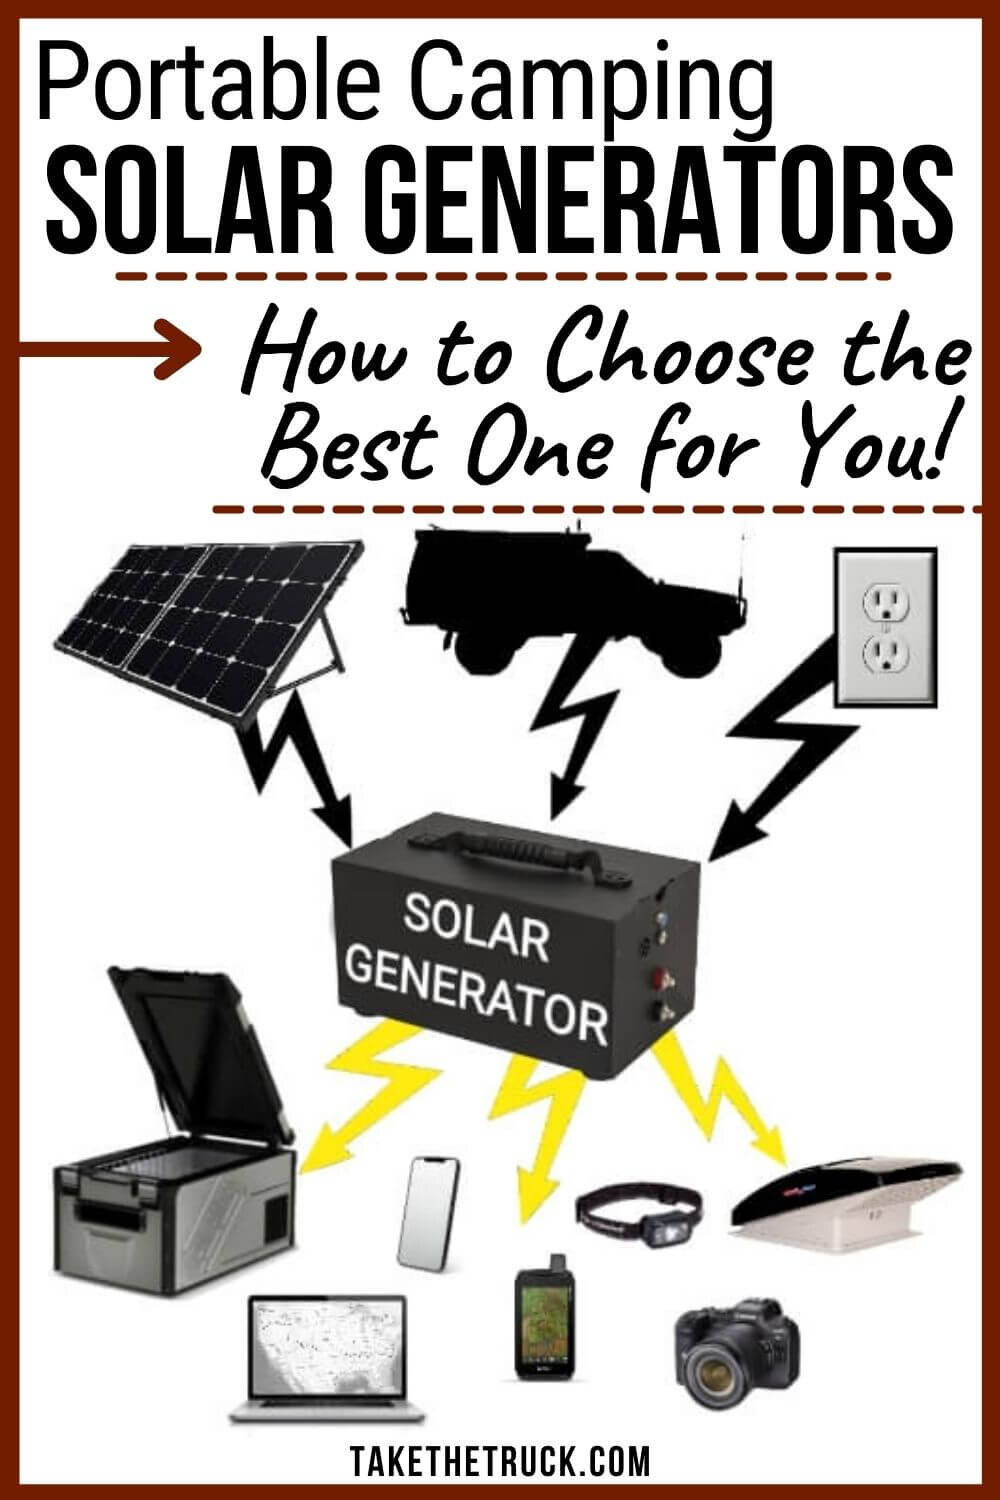 Read about portable solar generators for camping. Camping solar power and overlanding solar power is easy to get with this post so you can figure out your solar power setup for camping off grid.